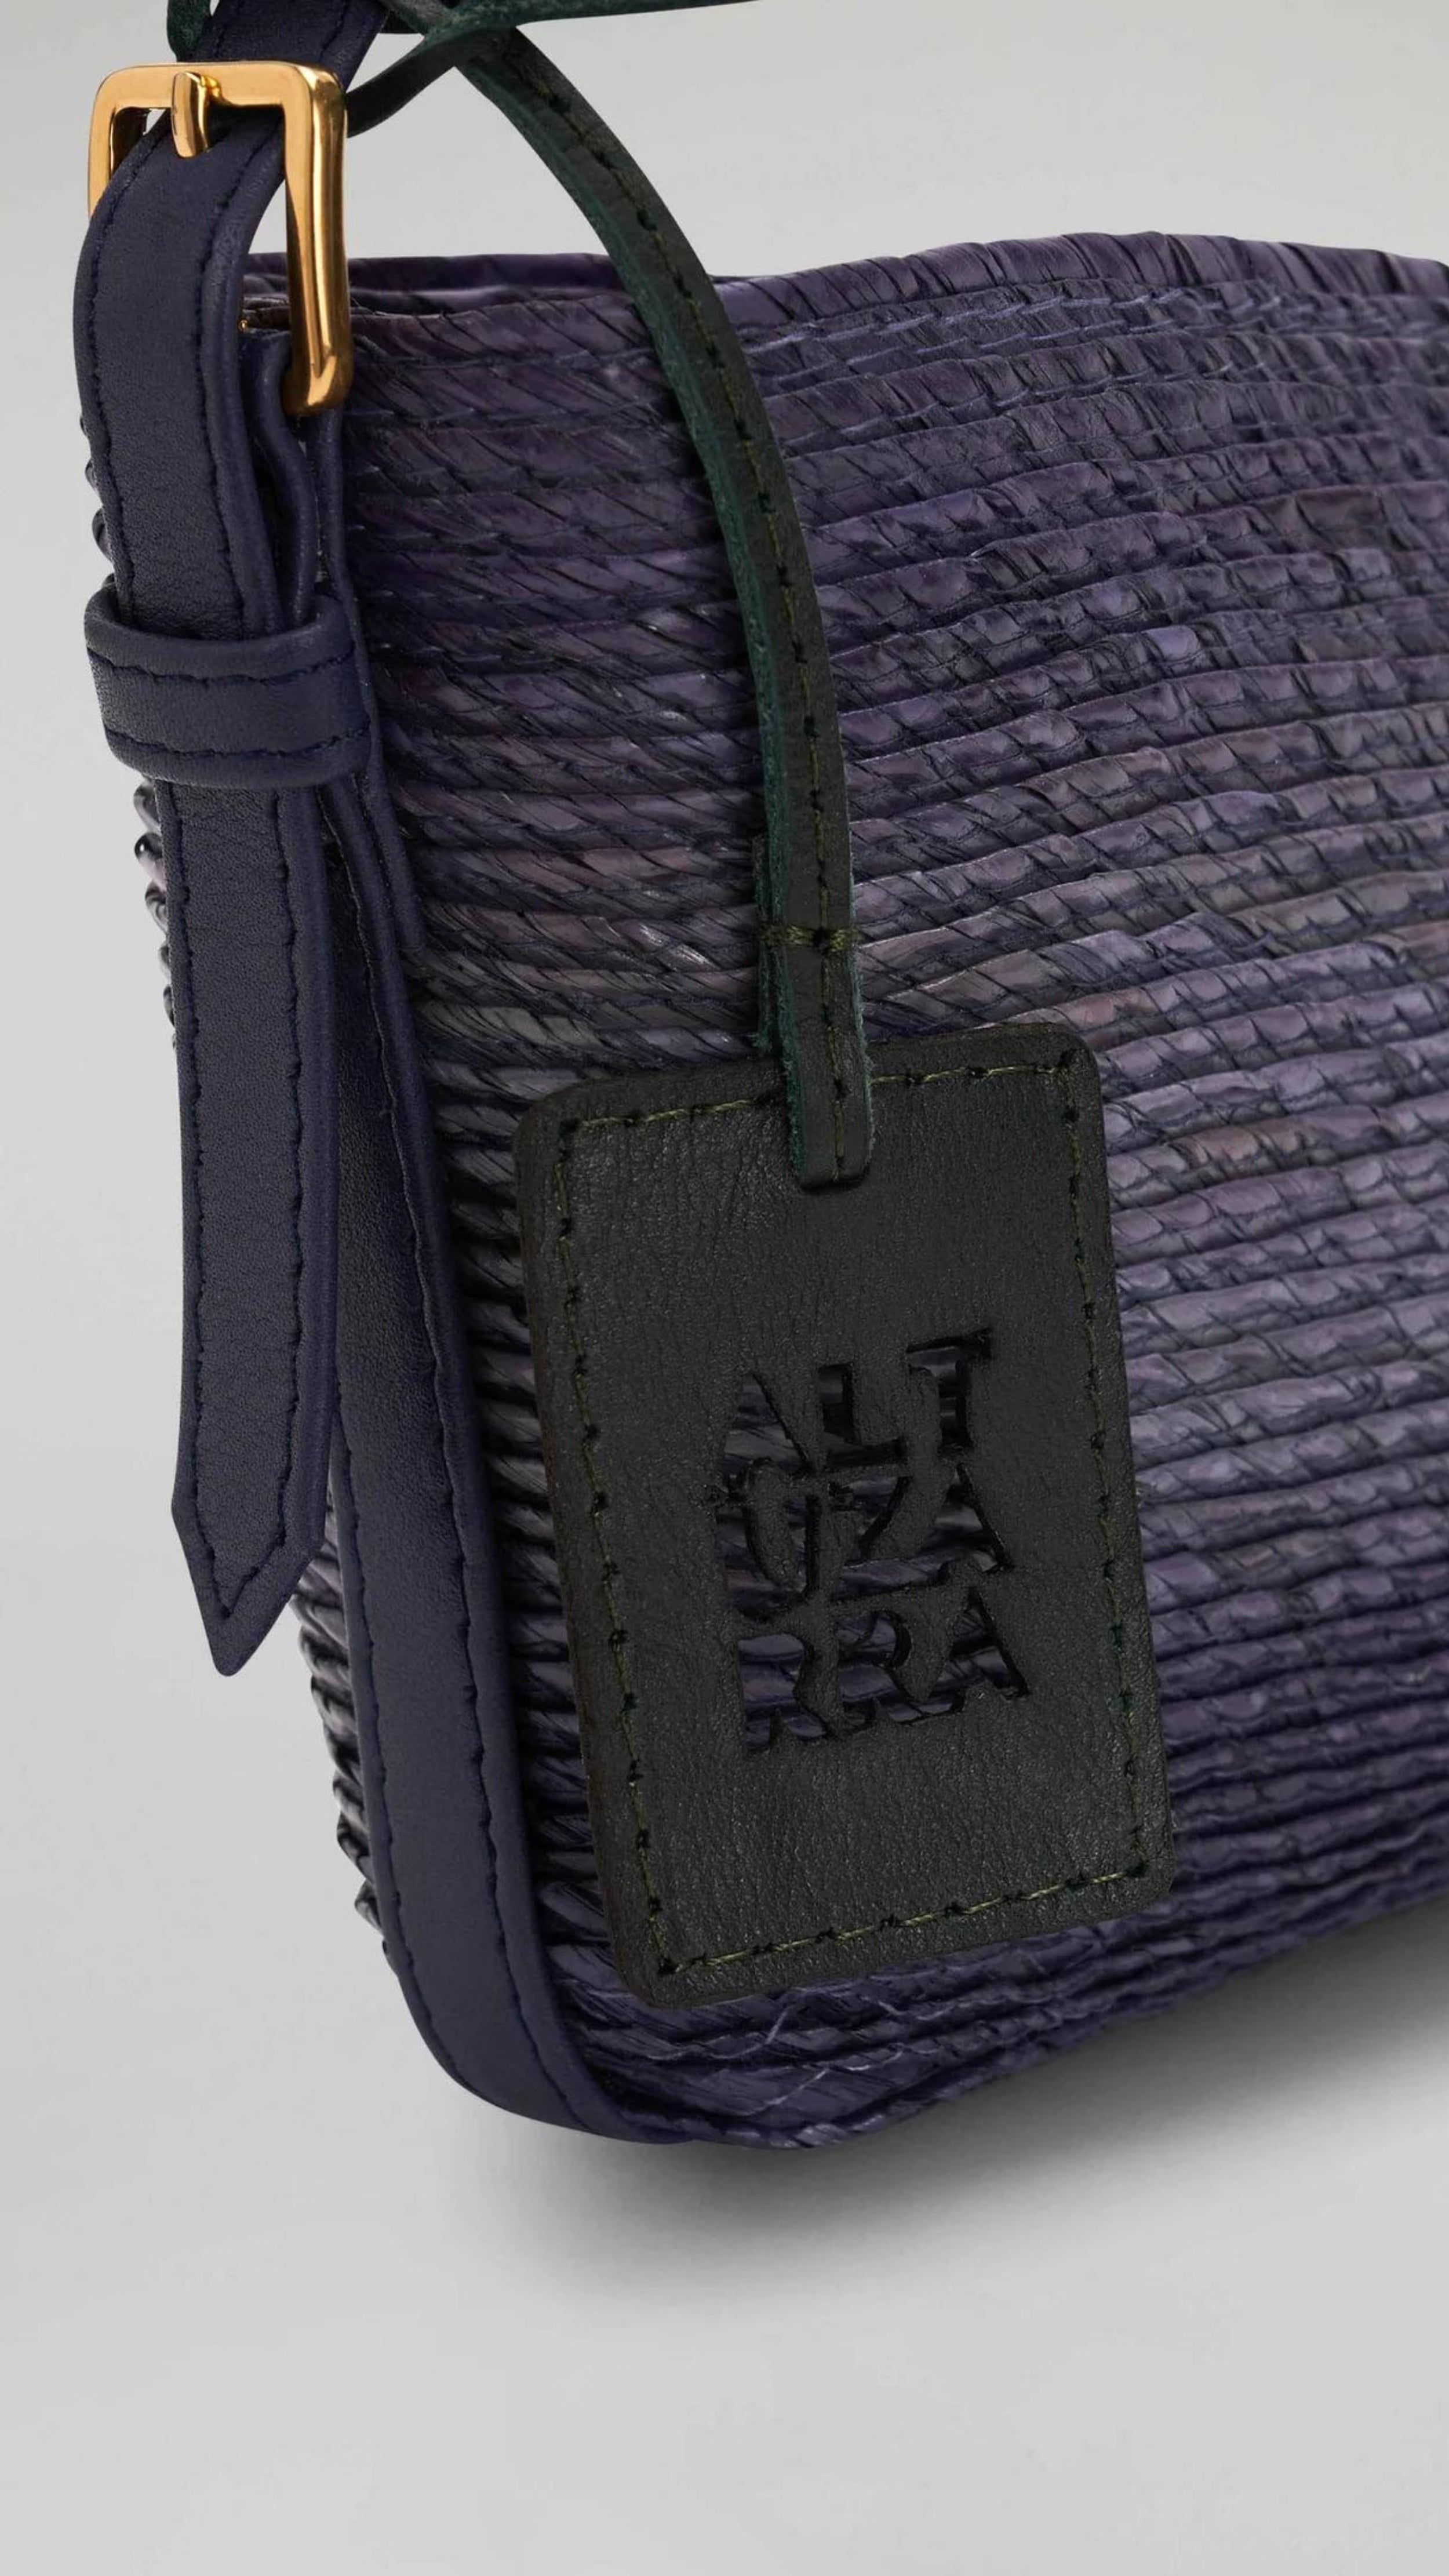 Altruzarra WATERMILL SHOULDER BAG in Murex. Raffia summer purse in deep blue tones and navy blue leather detailing and gold hardware. Adjustable strap for shoulder or long length. Close up view of the Altruzarra blue leather tag.. Available at Experience 27 Madrid Spain.